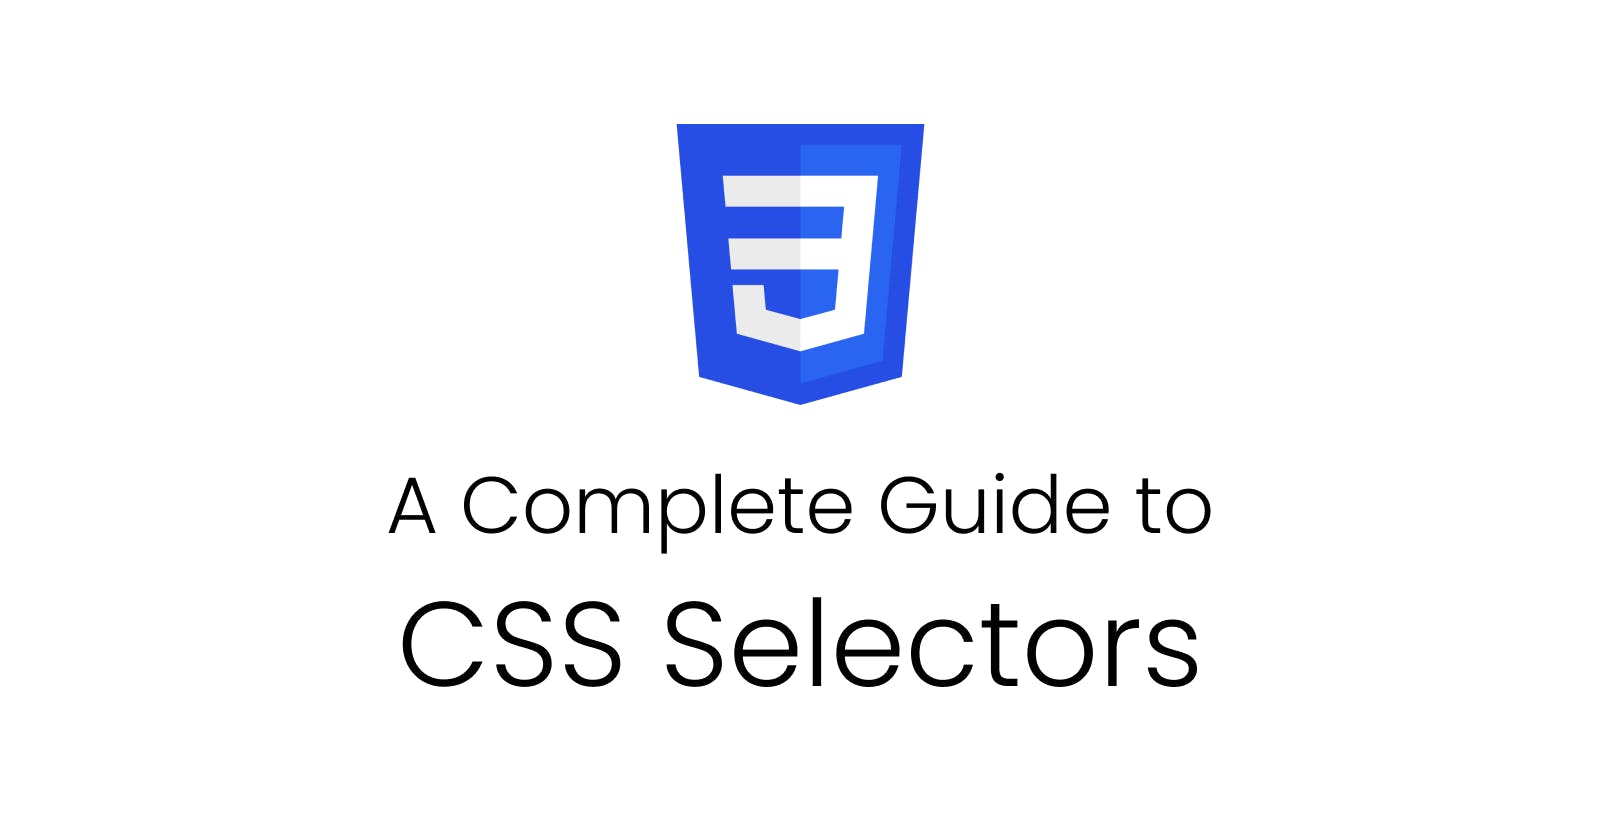 A Complete Guide To CSS Selector